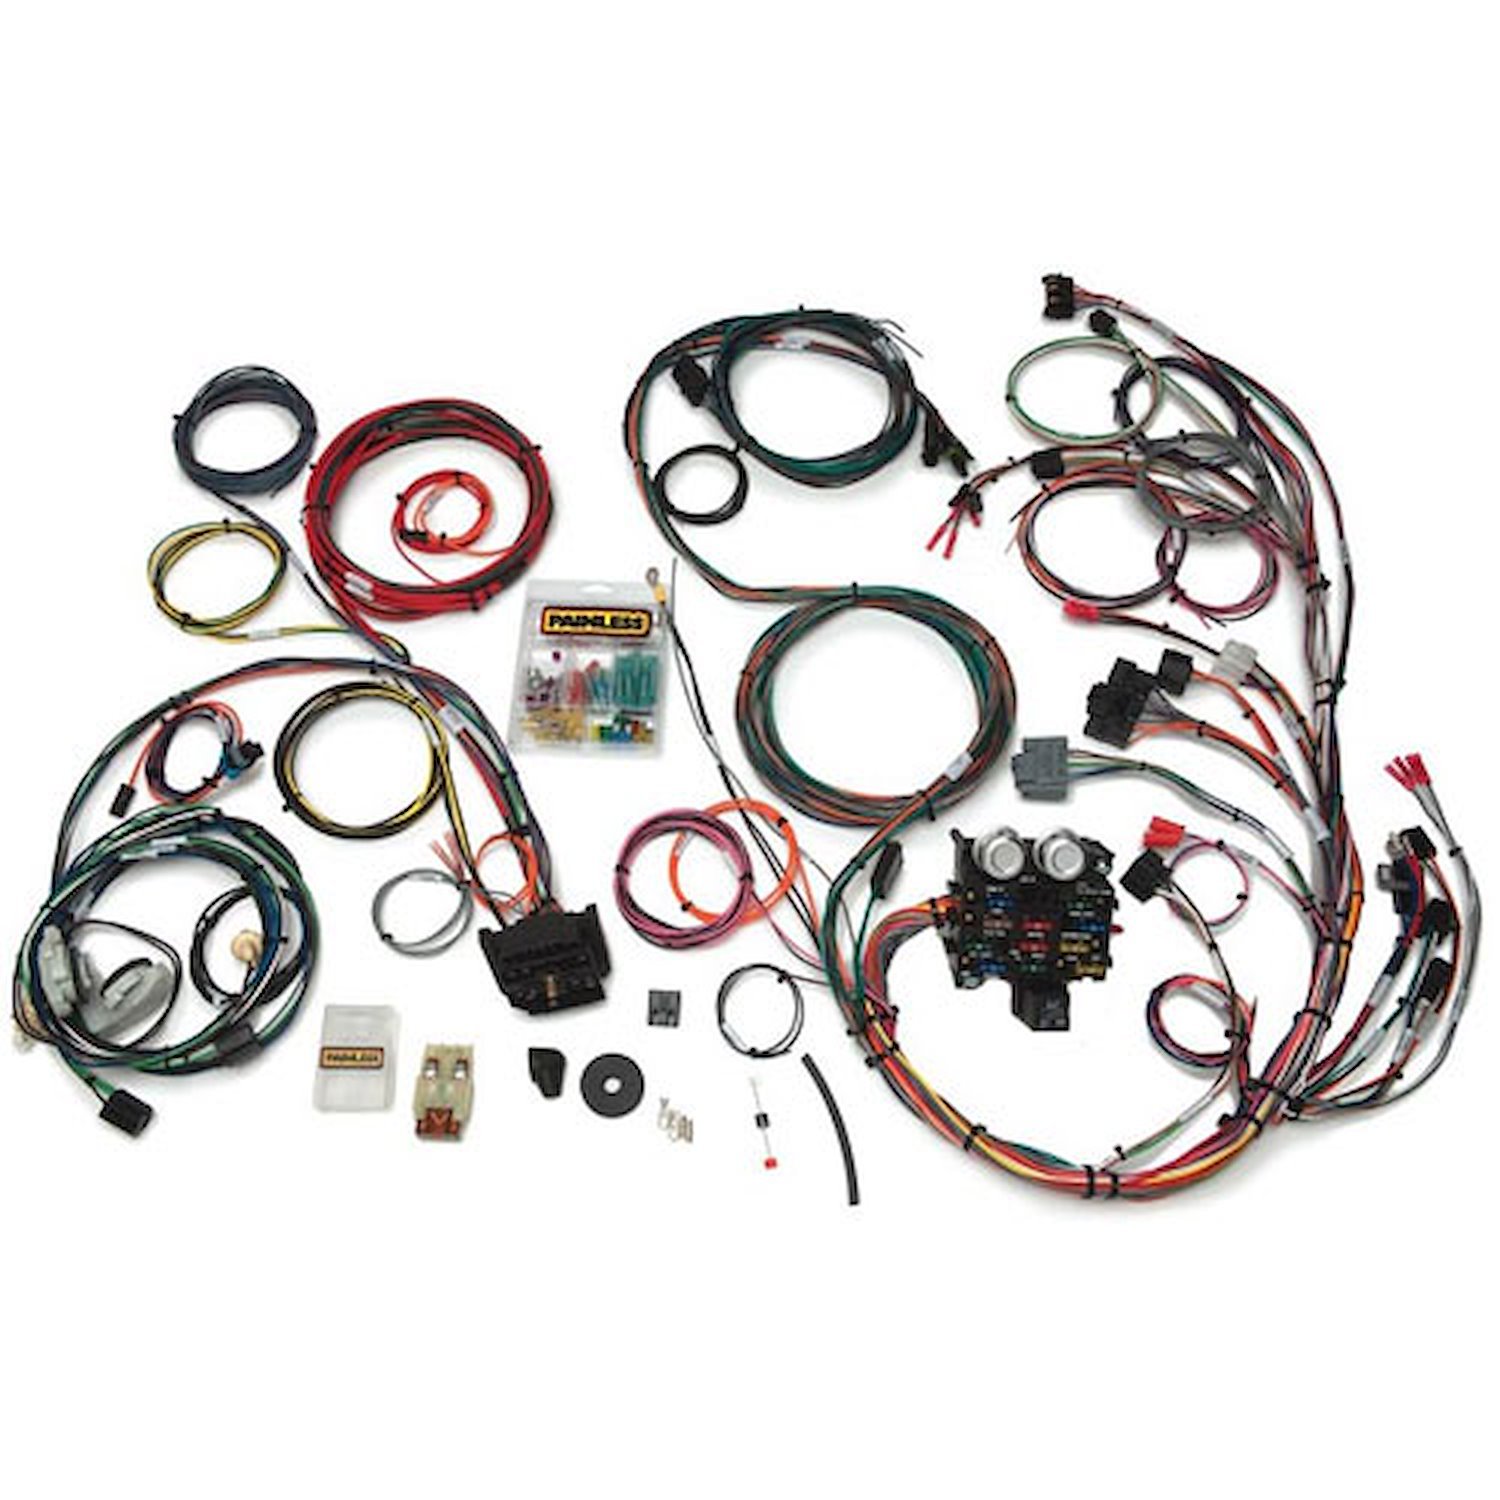 Direct-Fit 23-Circuit Wire Harness for 1987-1991 Jeep YJ Wrangler